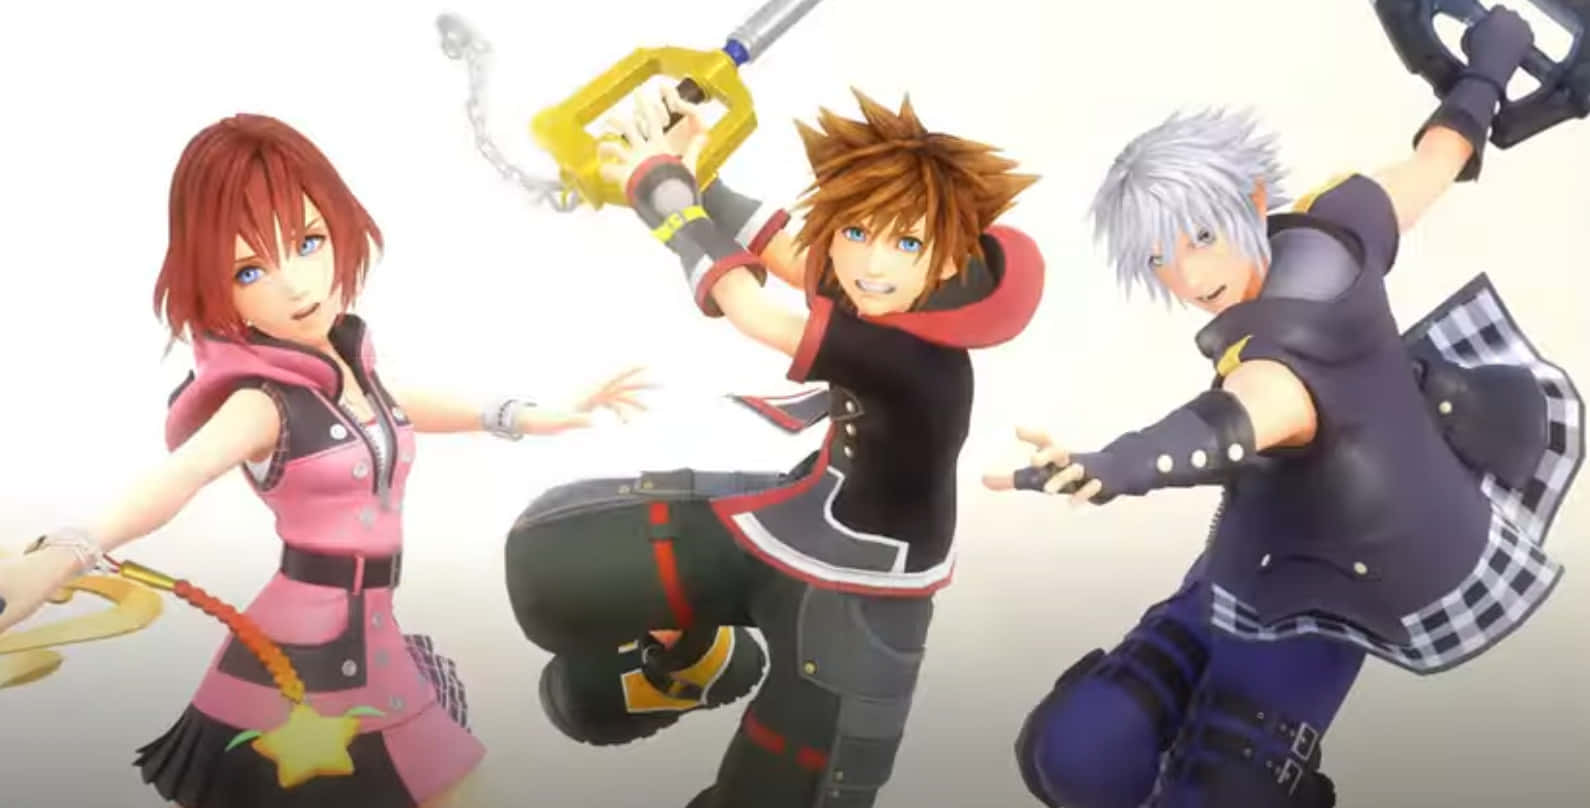 Kingdom Hearts Epic Ensemble - Key characters from the Kingdom Hearts series in an iconic pose. Wallpaper